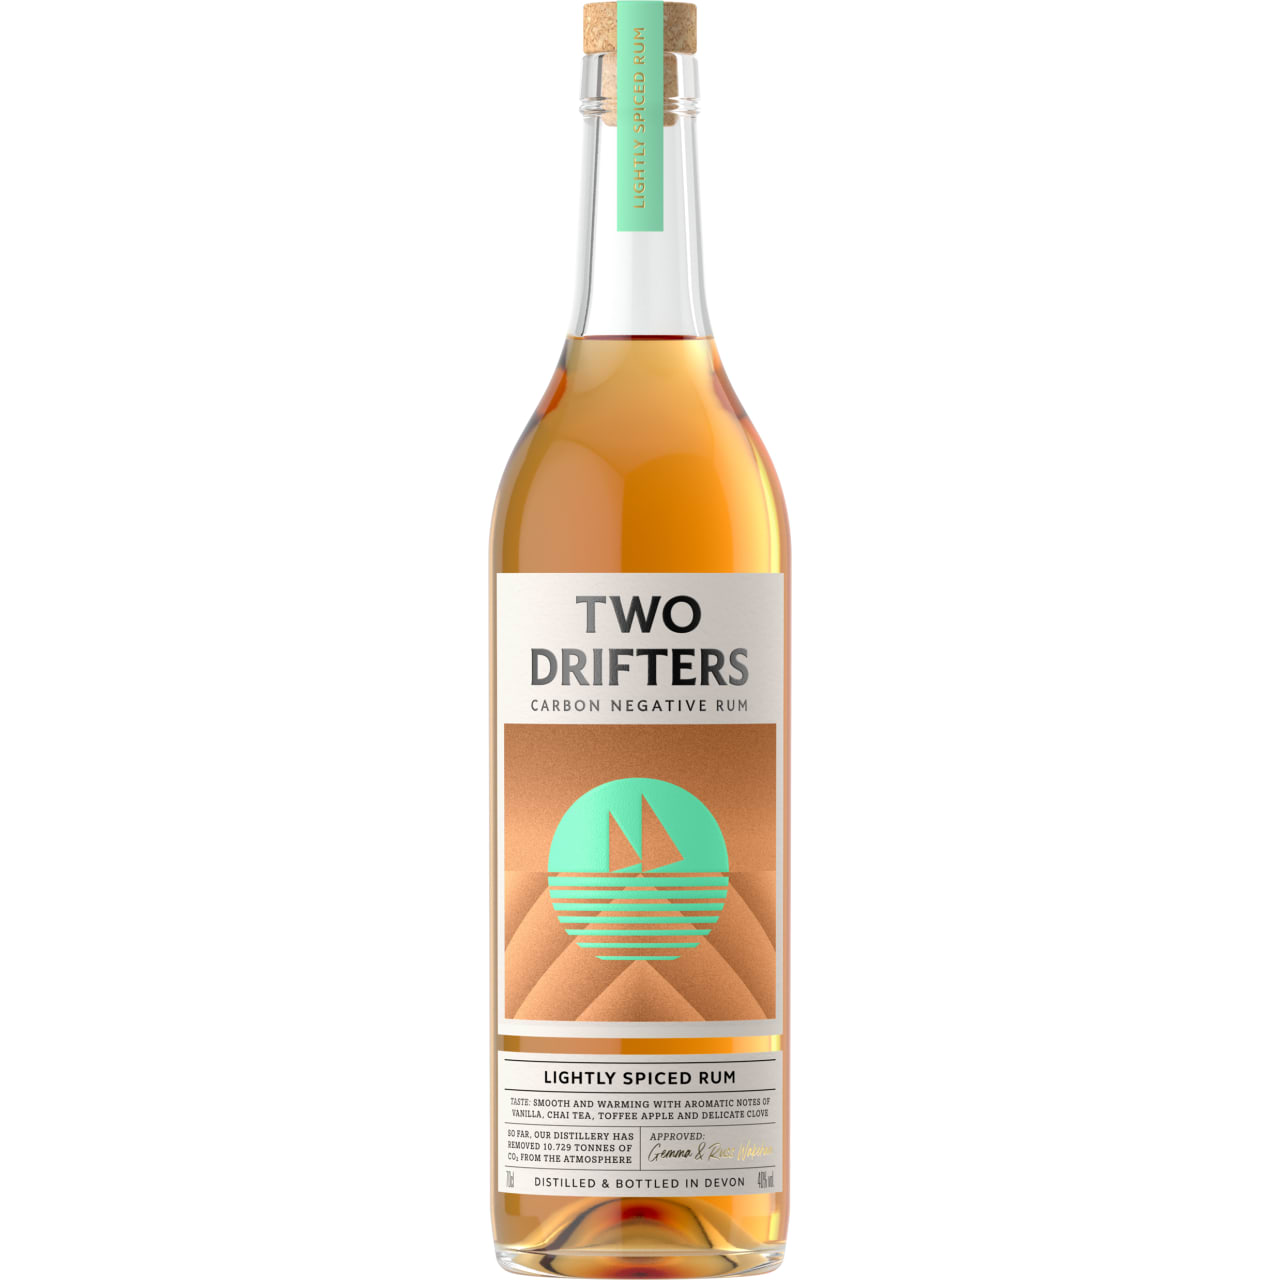 Two Drifters Lightly Spiced Rum comes from Devon, and the distillery was created with sustainability and environmentally friendly practices in mind. This spiced rum is flavoured with burnt sugar, bourbon vanilla, mixed spices and star anise.